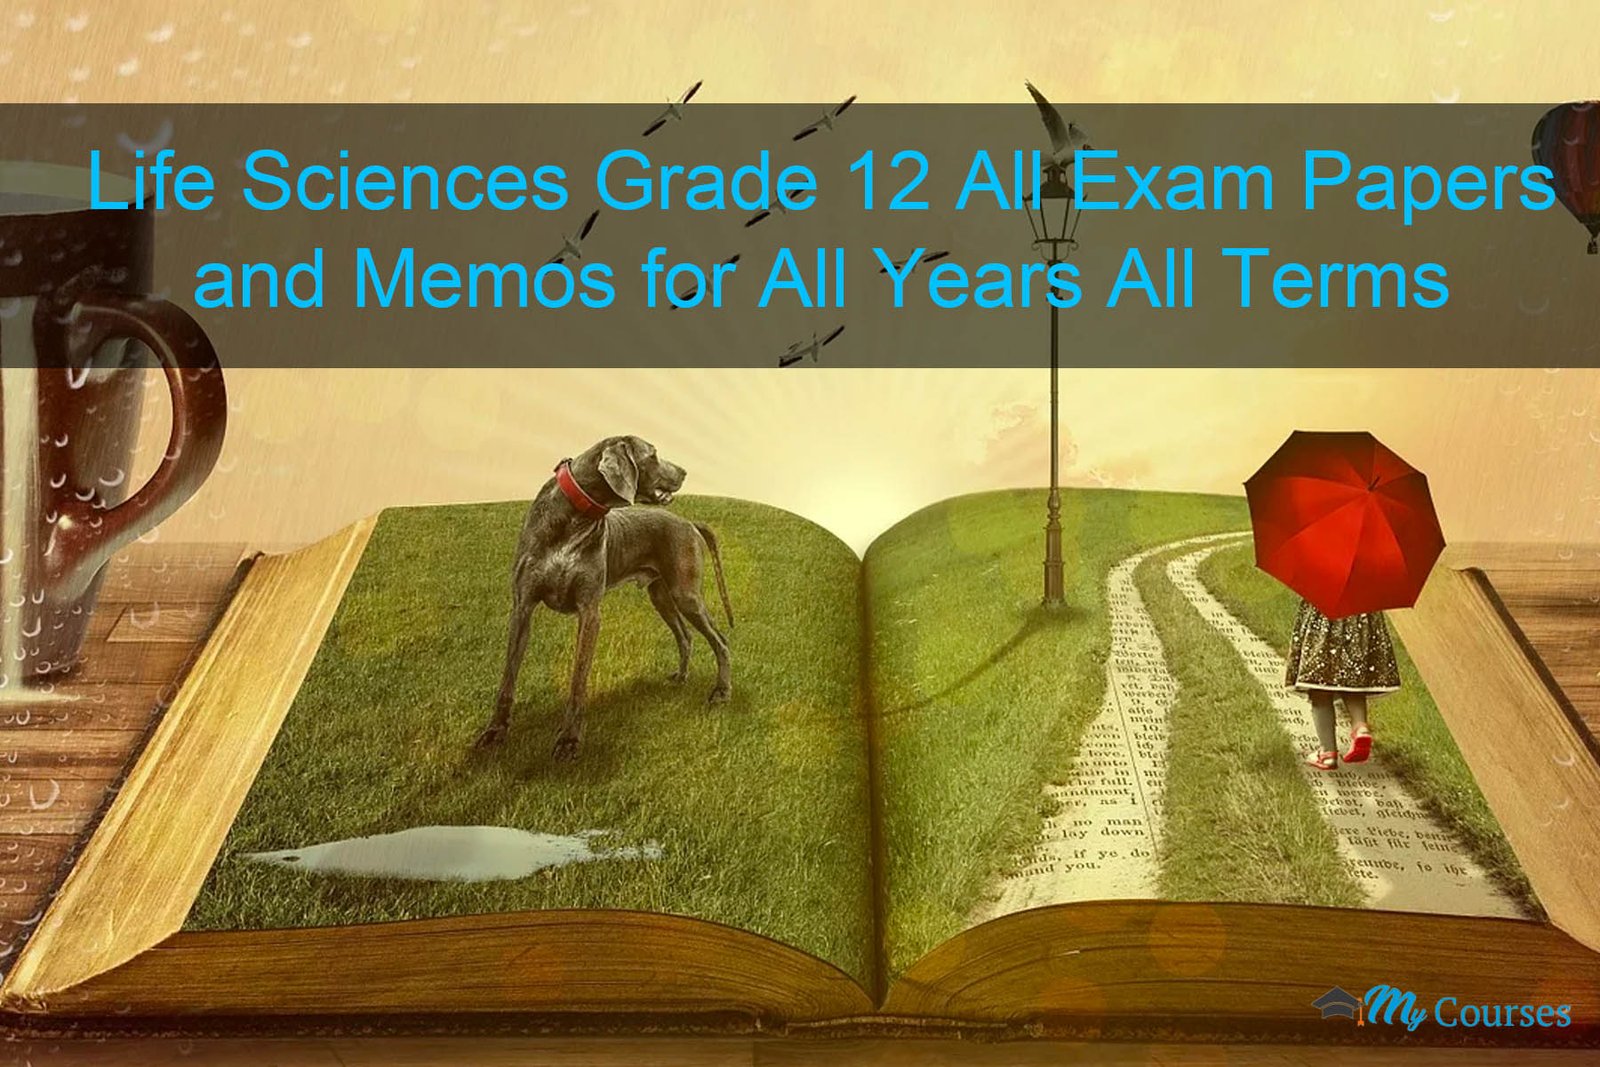 Life Sciences Grade 12 All Exam Papers and Memos for All Years All Terms